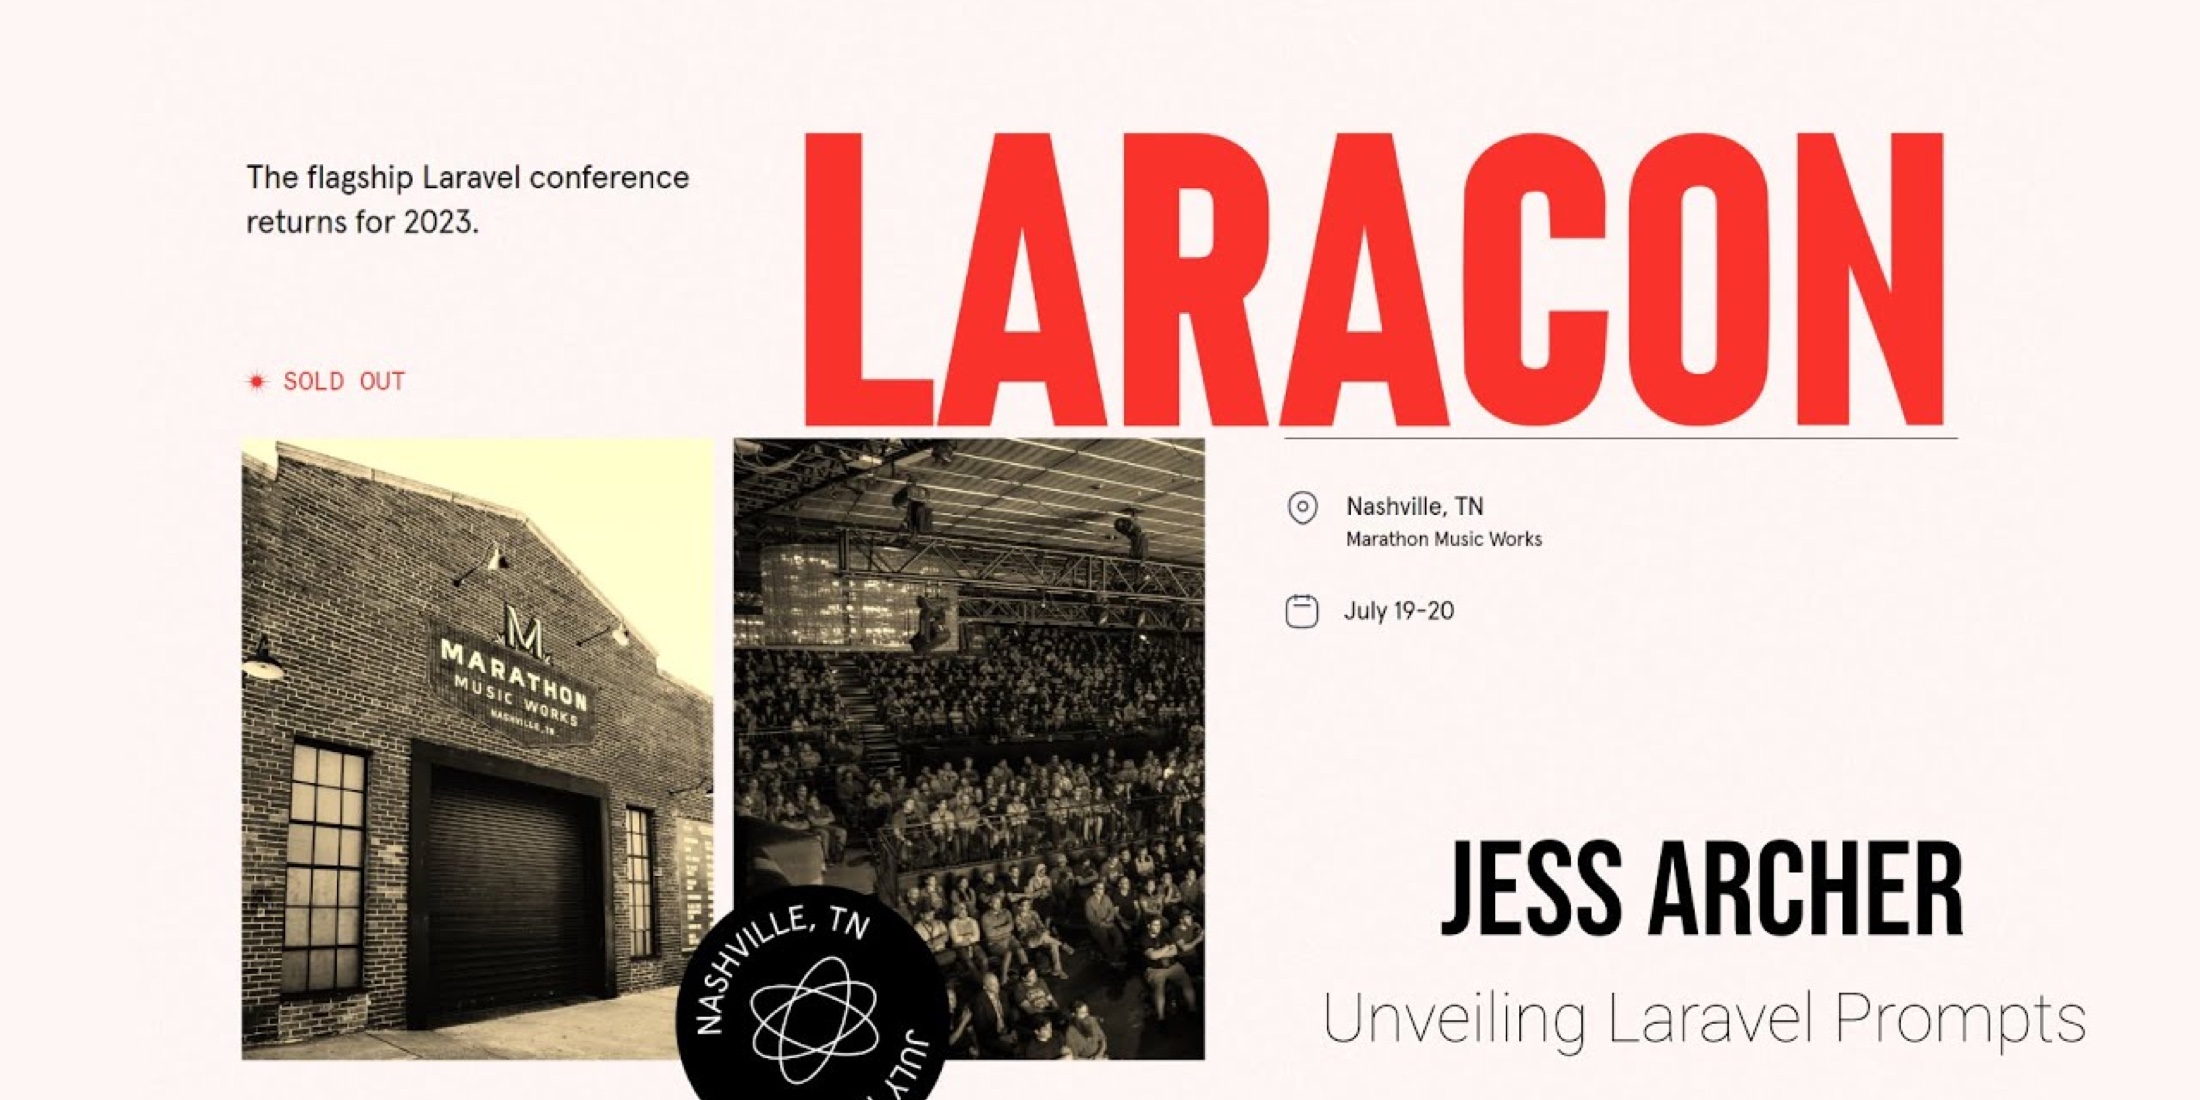 Watch Jess Archer's "Unveiling Laravel Prompts" talk from Laracon image